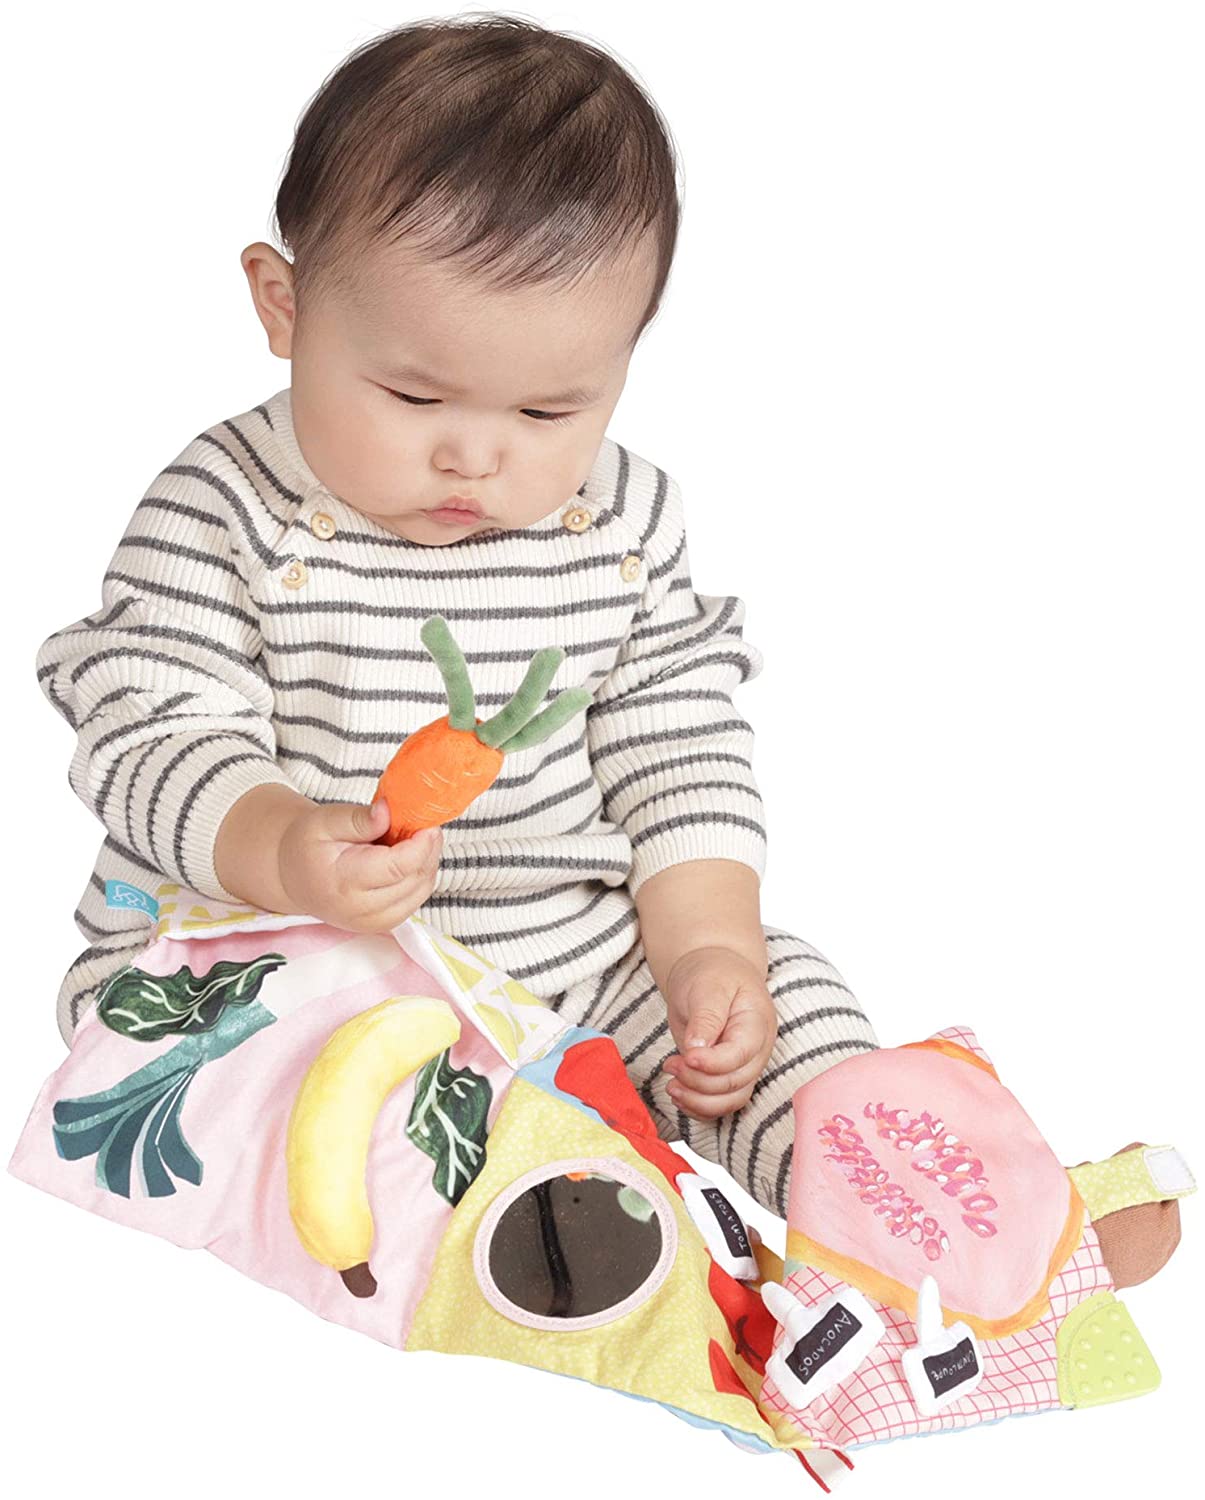 Manhattan Toy Mini-Apple Farm Soft Activity Crinkle Book for Baby /& Toddler with Discovery Mirror and Textured Teether